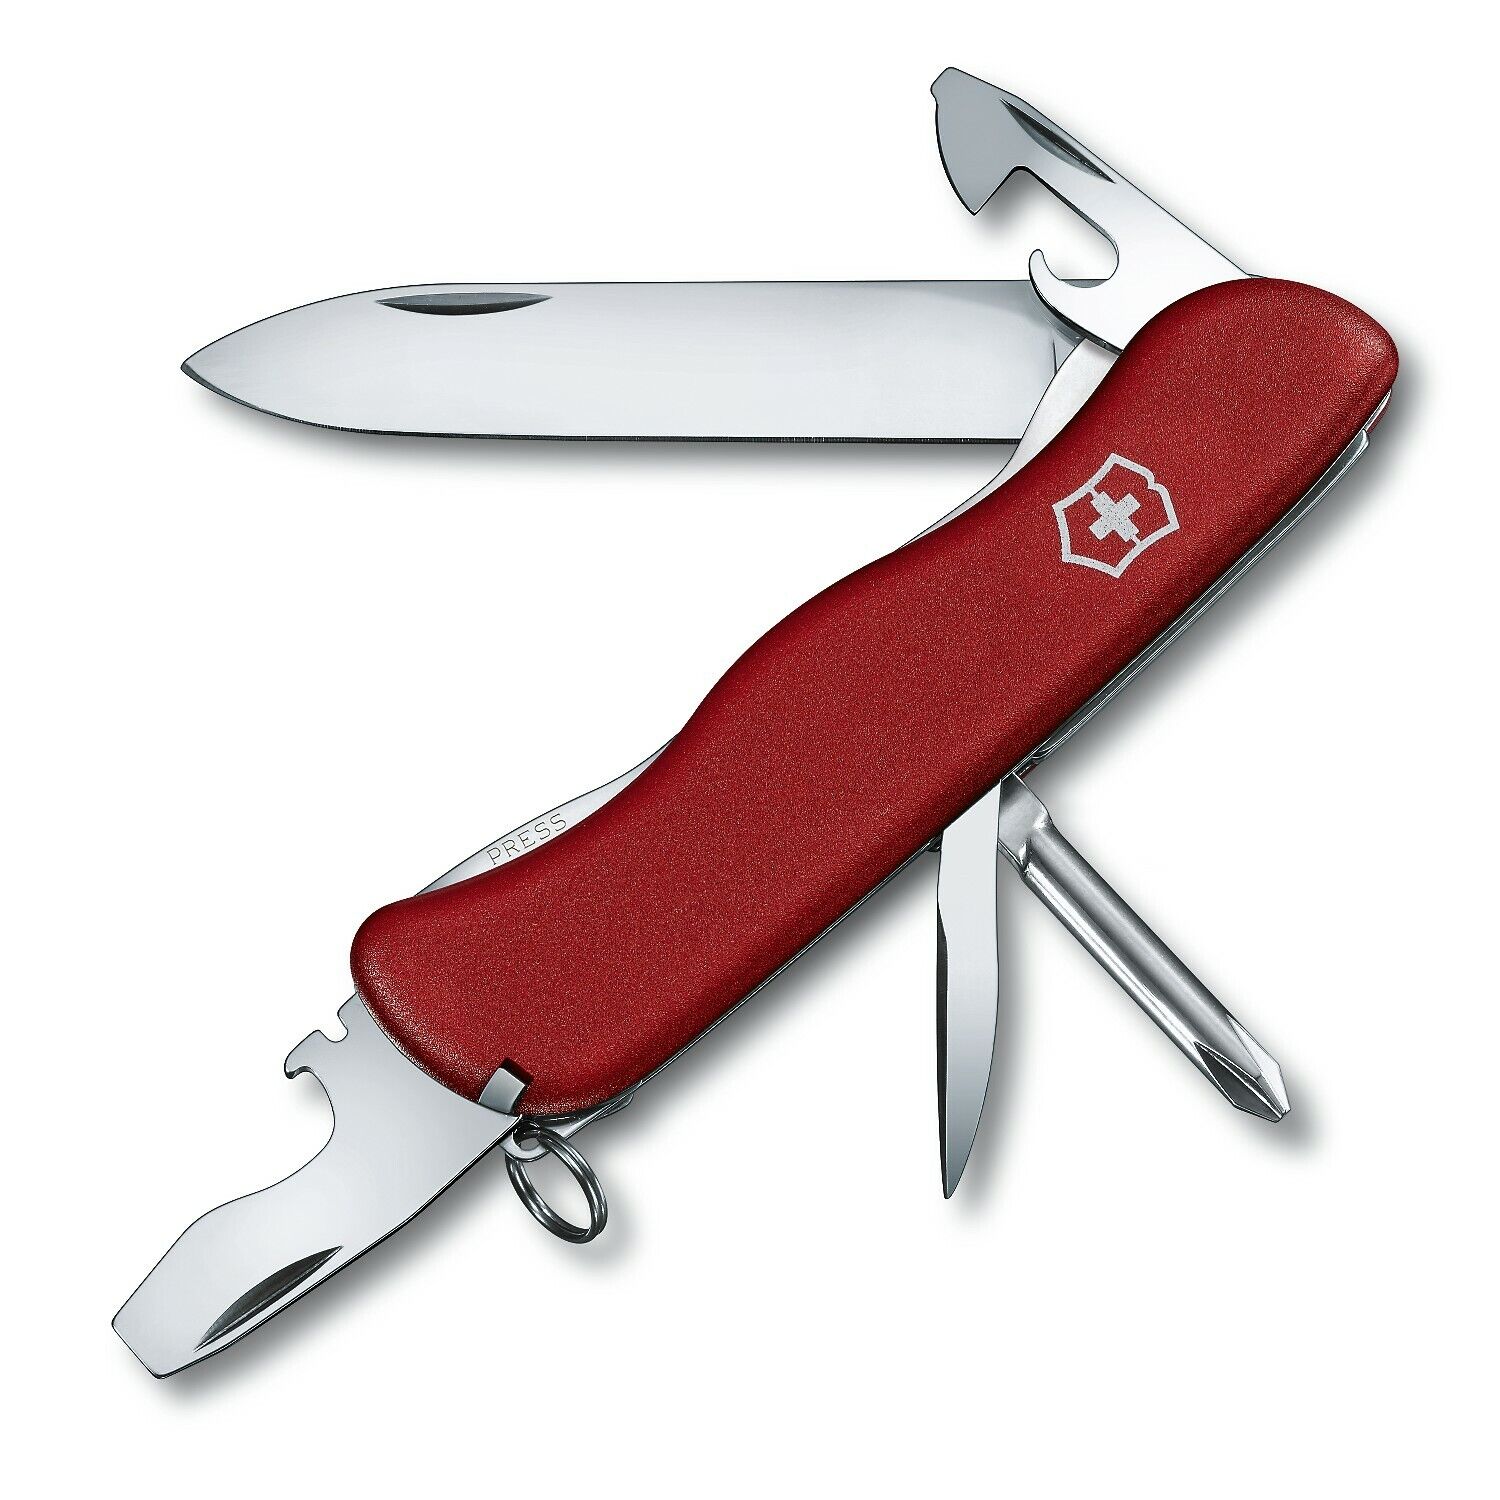 NEW VICTORINOX SWISS ARMY KNIFE ADVENTURER RED WITH LOCKING BLADE 0.8453 BOXED 